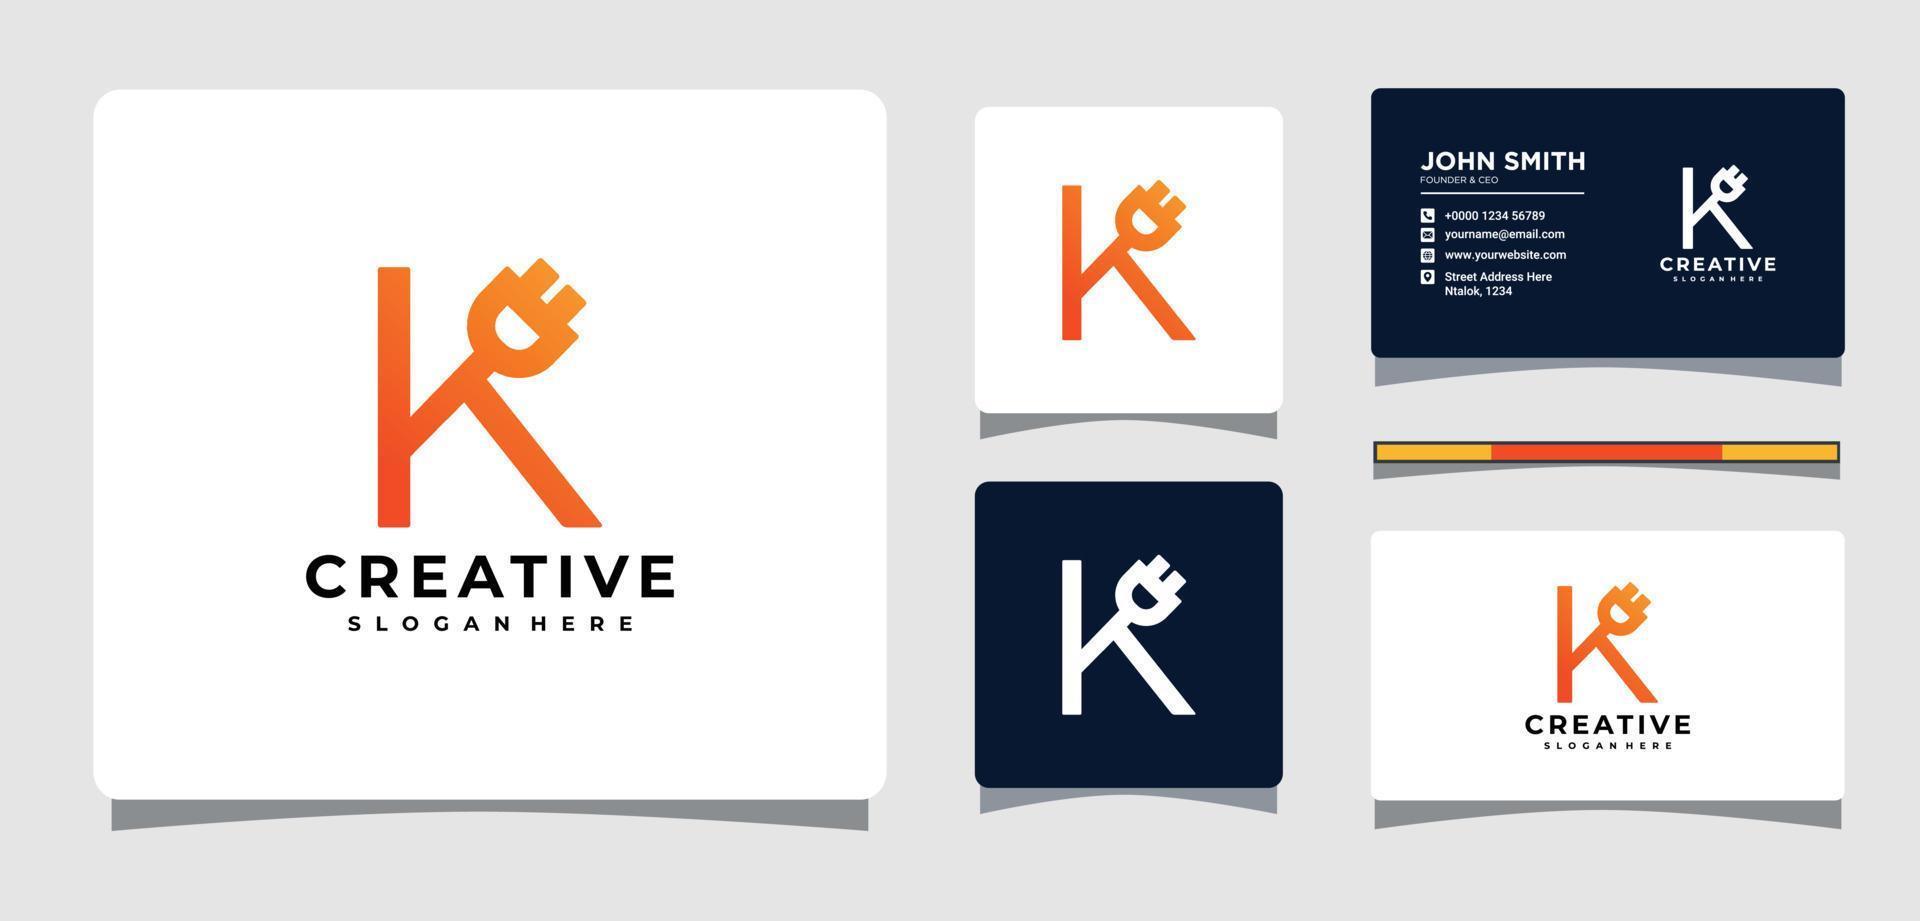 Letter K Electric Plug Logo Template With Business Card Design Inspiration vector